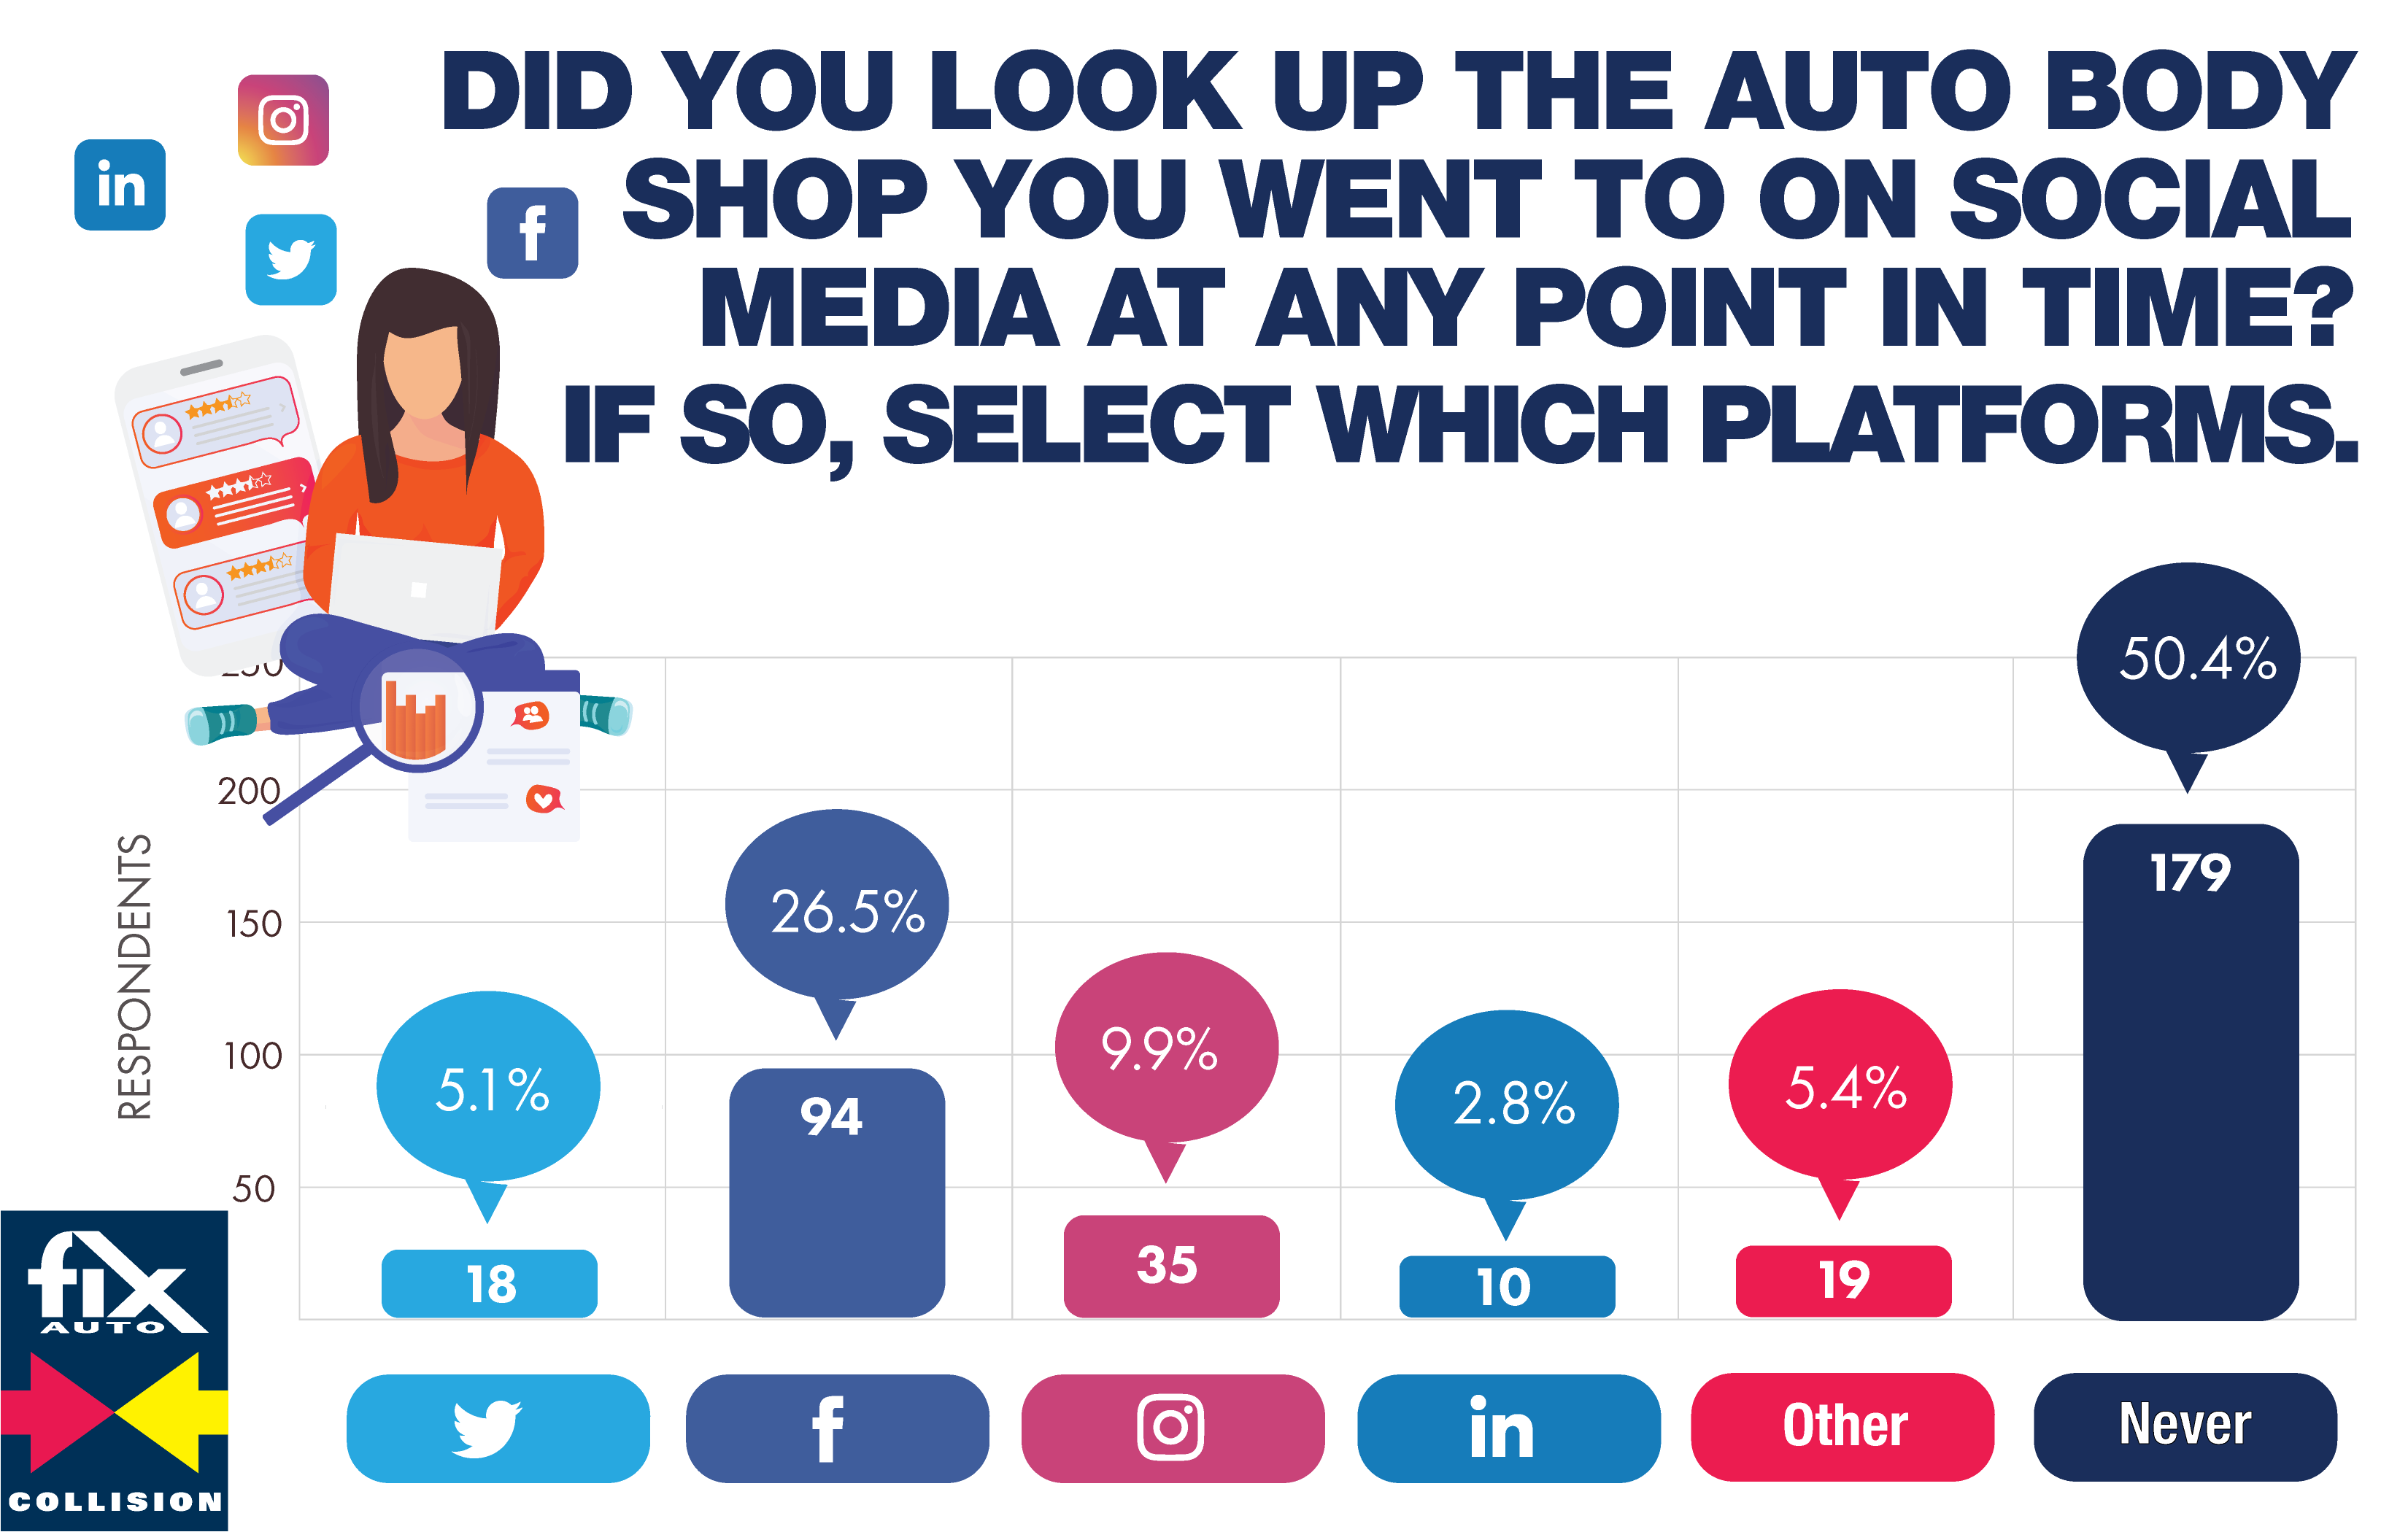 did you look up the auto body shop you went to on social media at any point in time? if so, select which platforms.